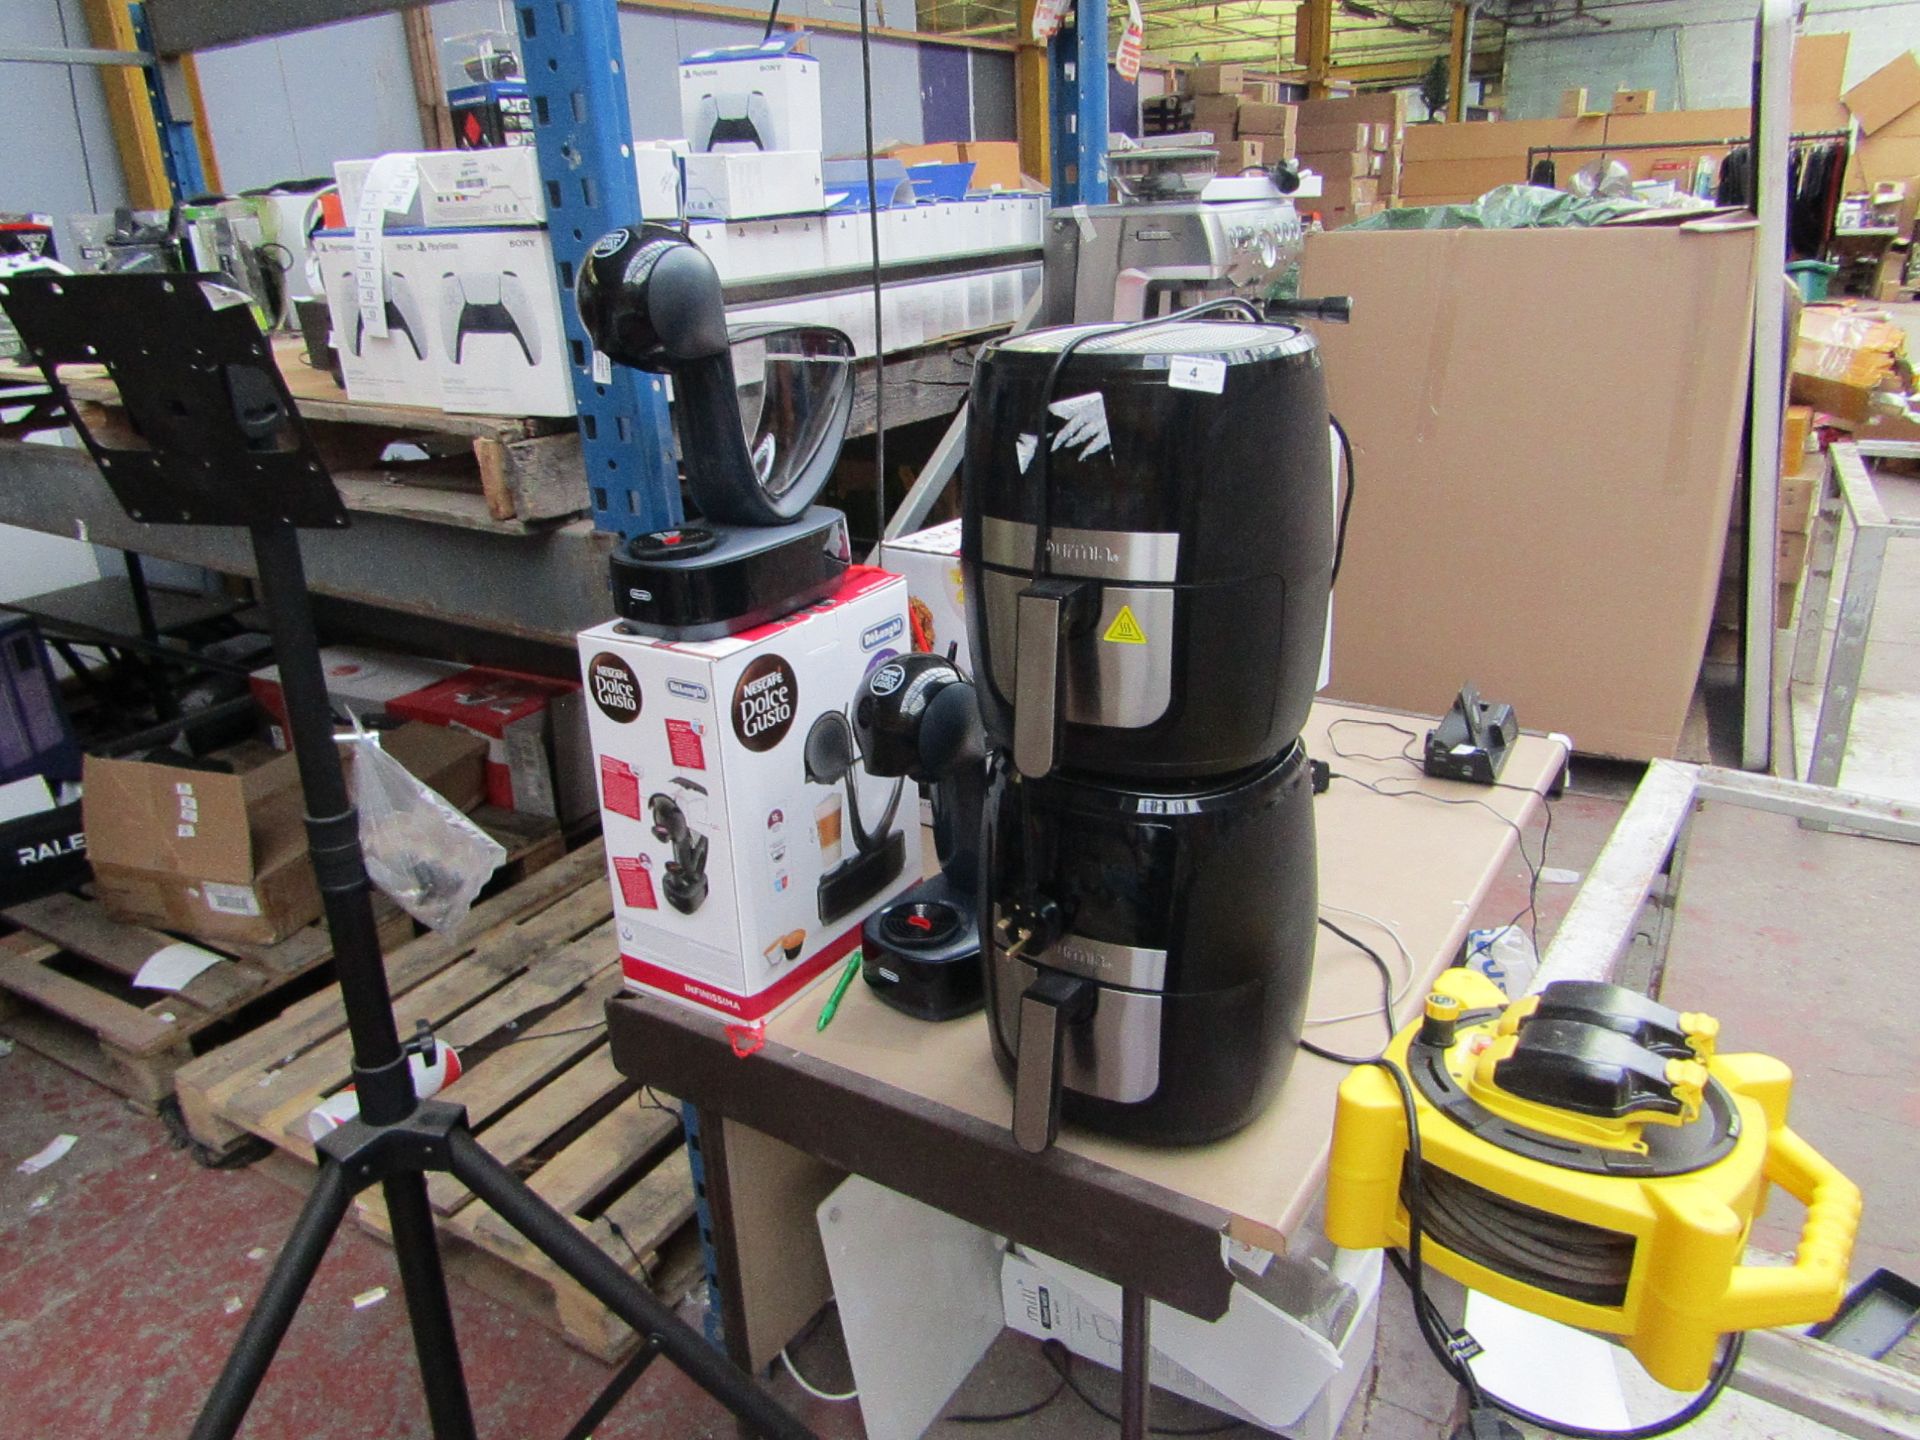 This lot is 4 items - 2x Gourmia Air fryers & 2x DeLonghi Dolce Gusto coffee machines - Please be